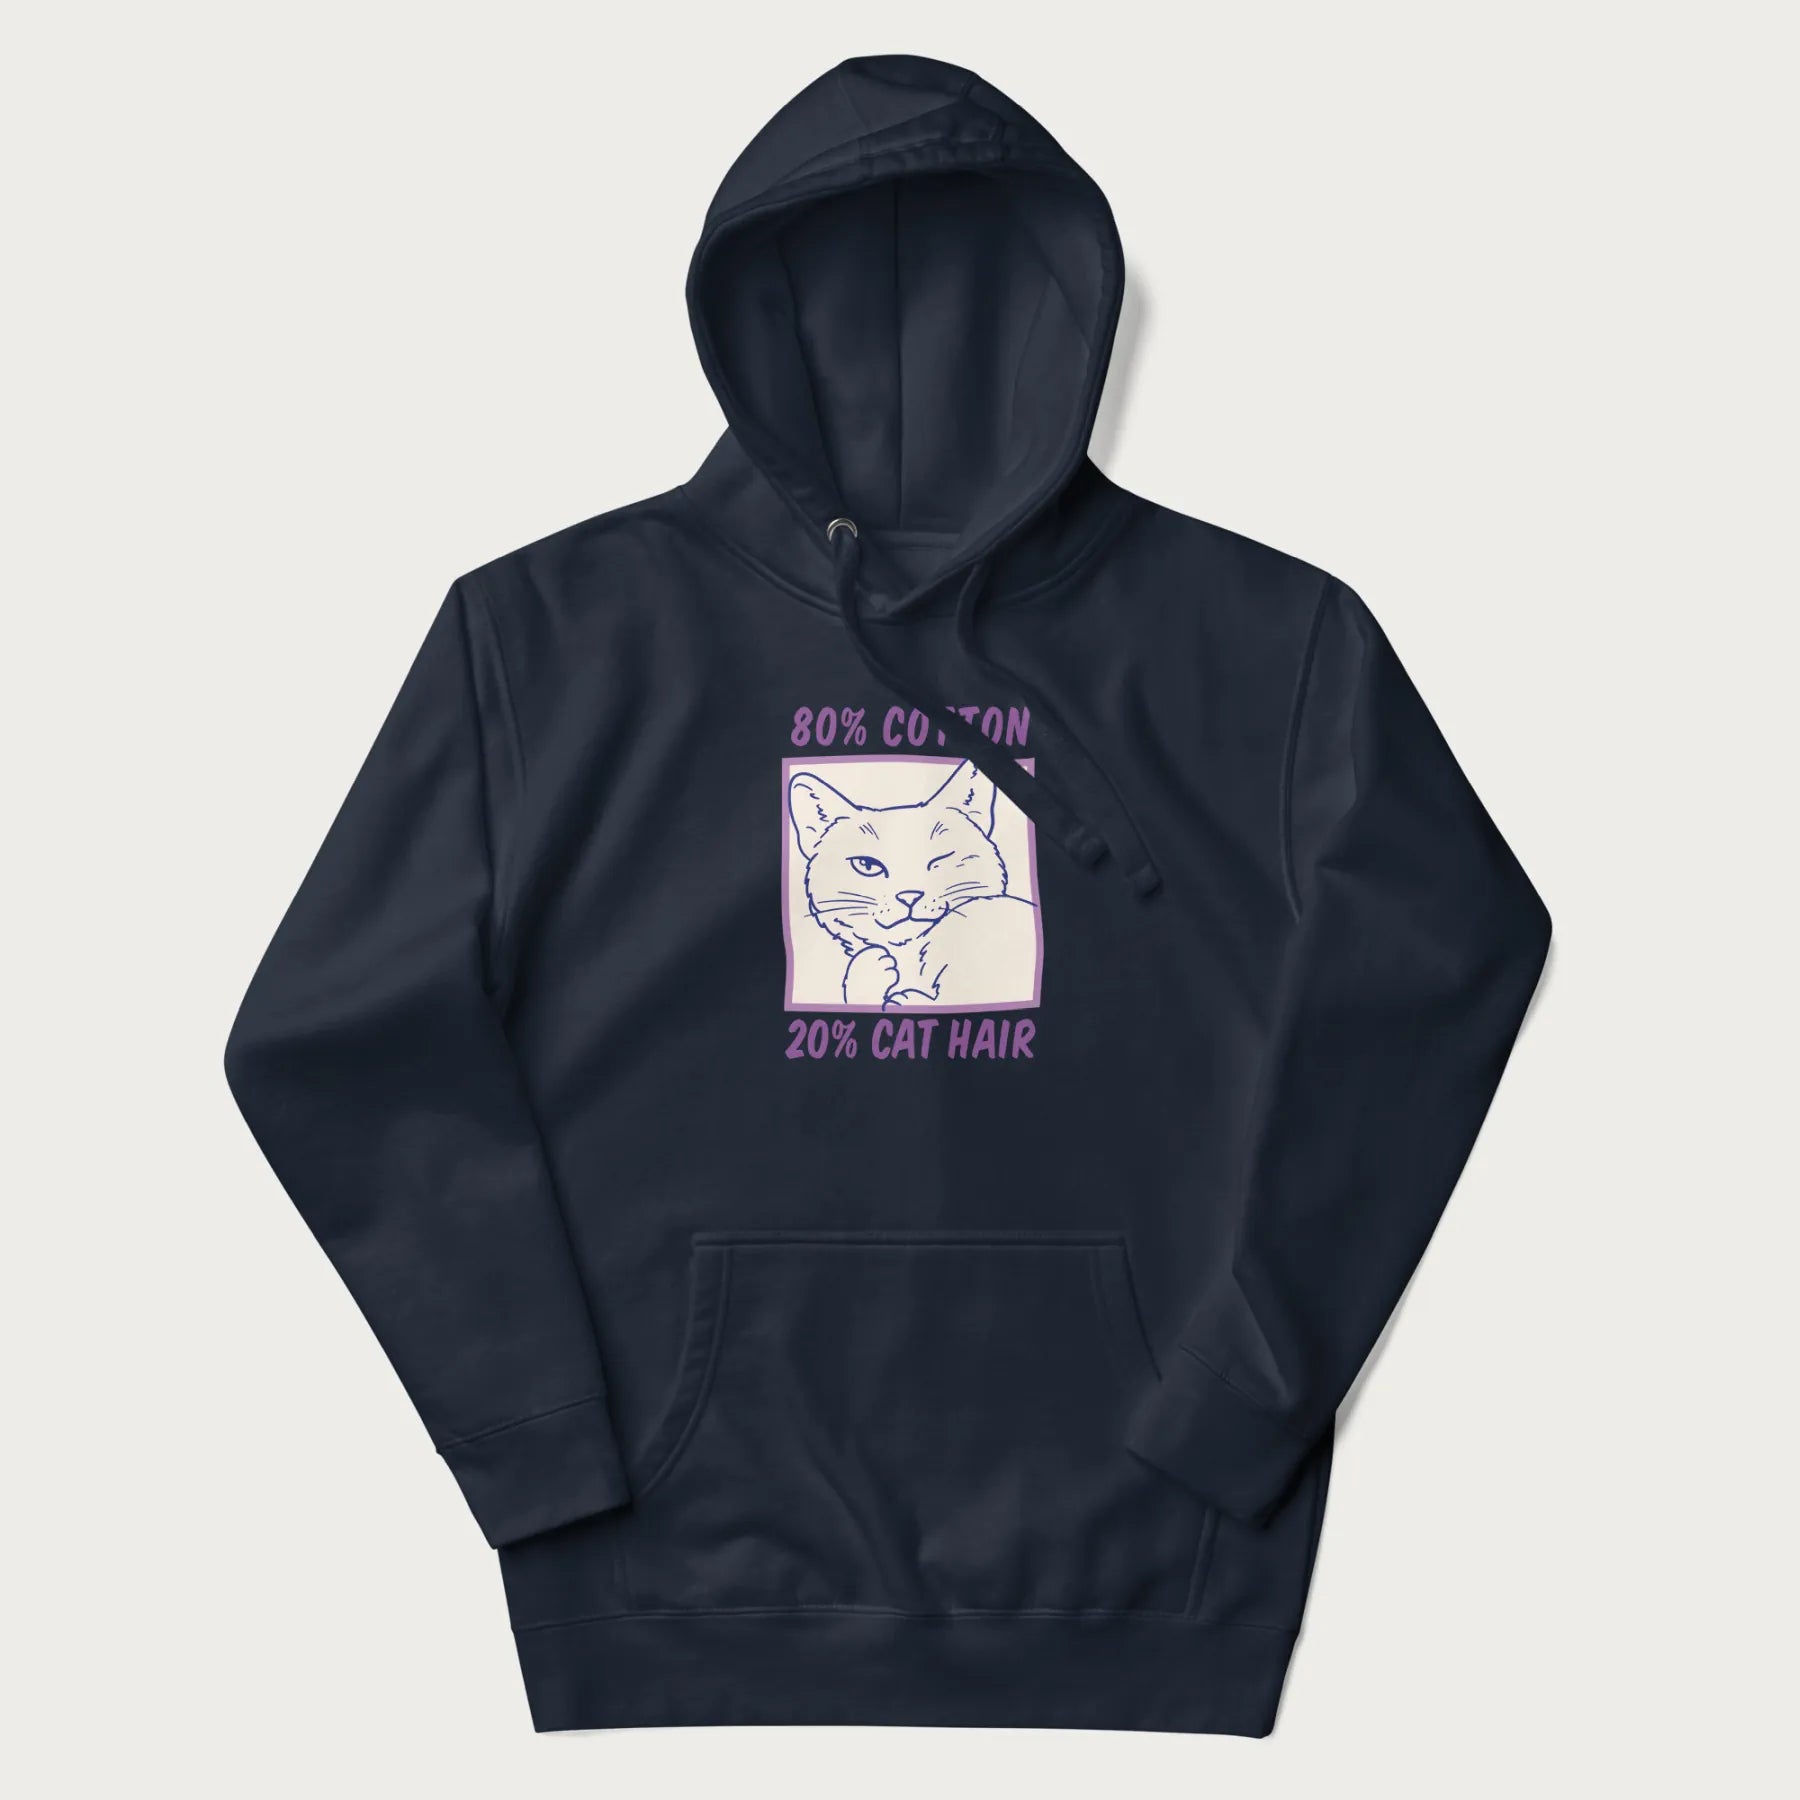 Navy blue hoodie with graphic of a winking cat with the text "80% cotton 20% cat hair".